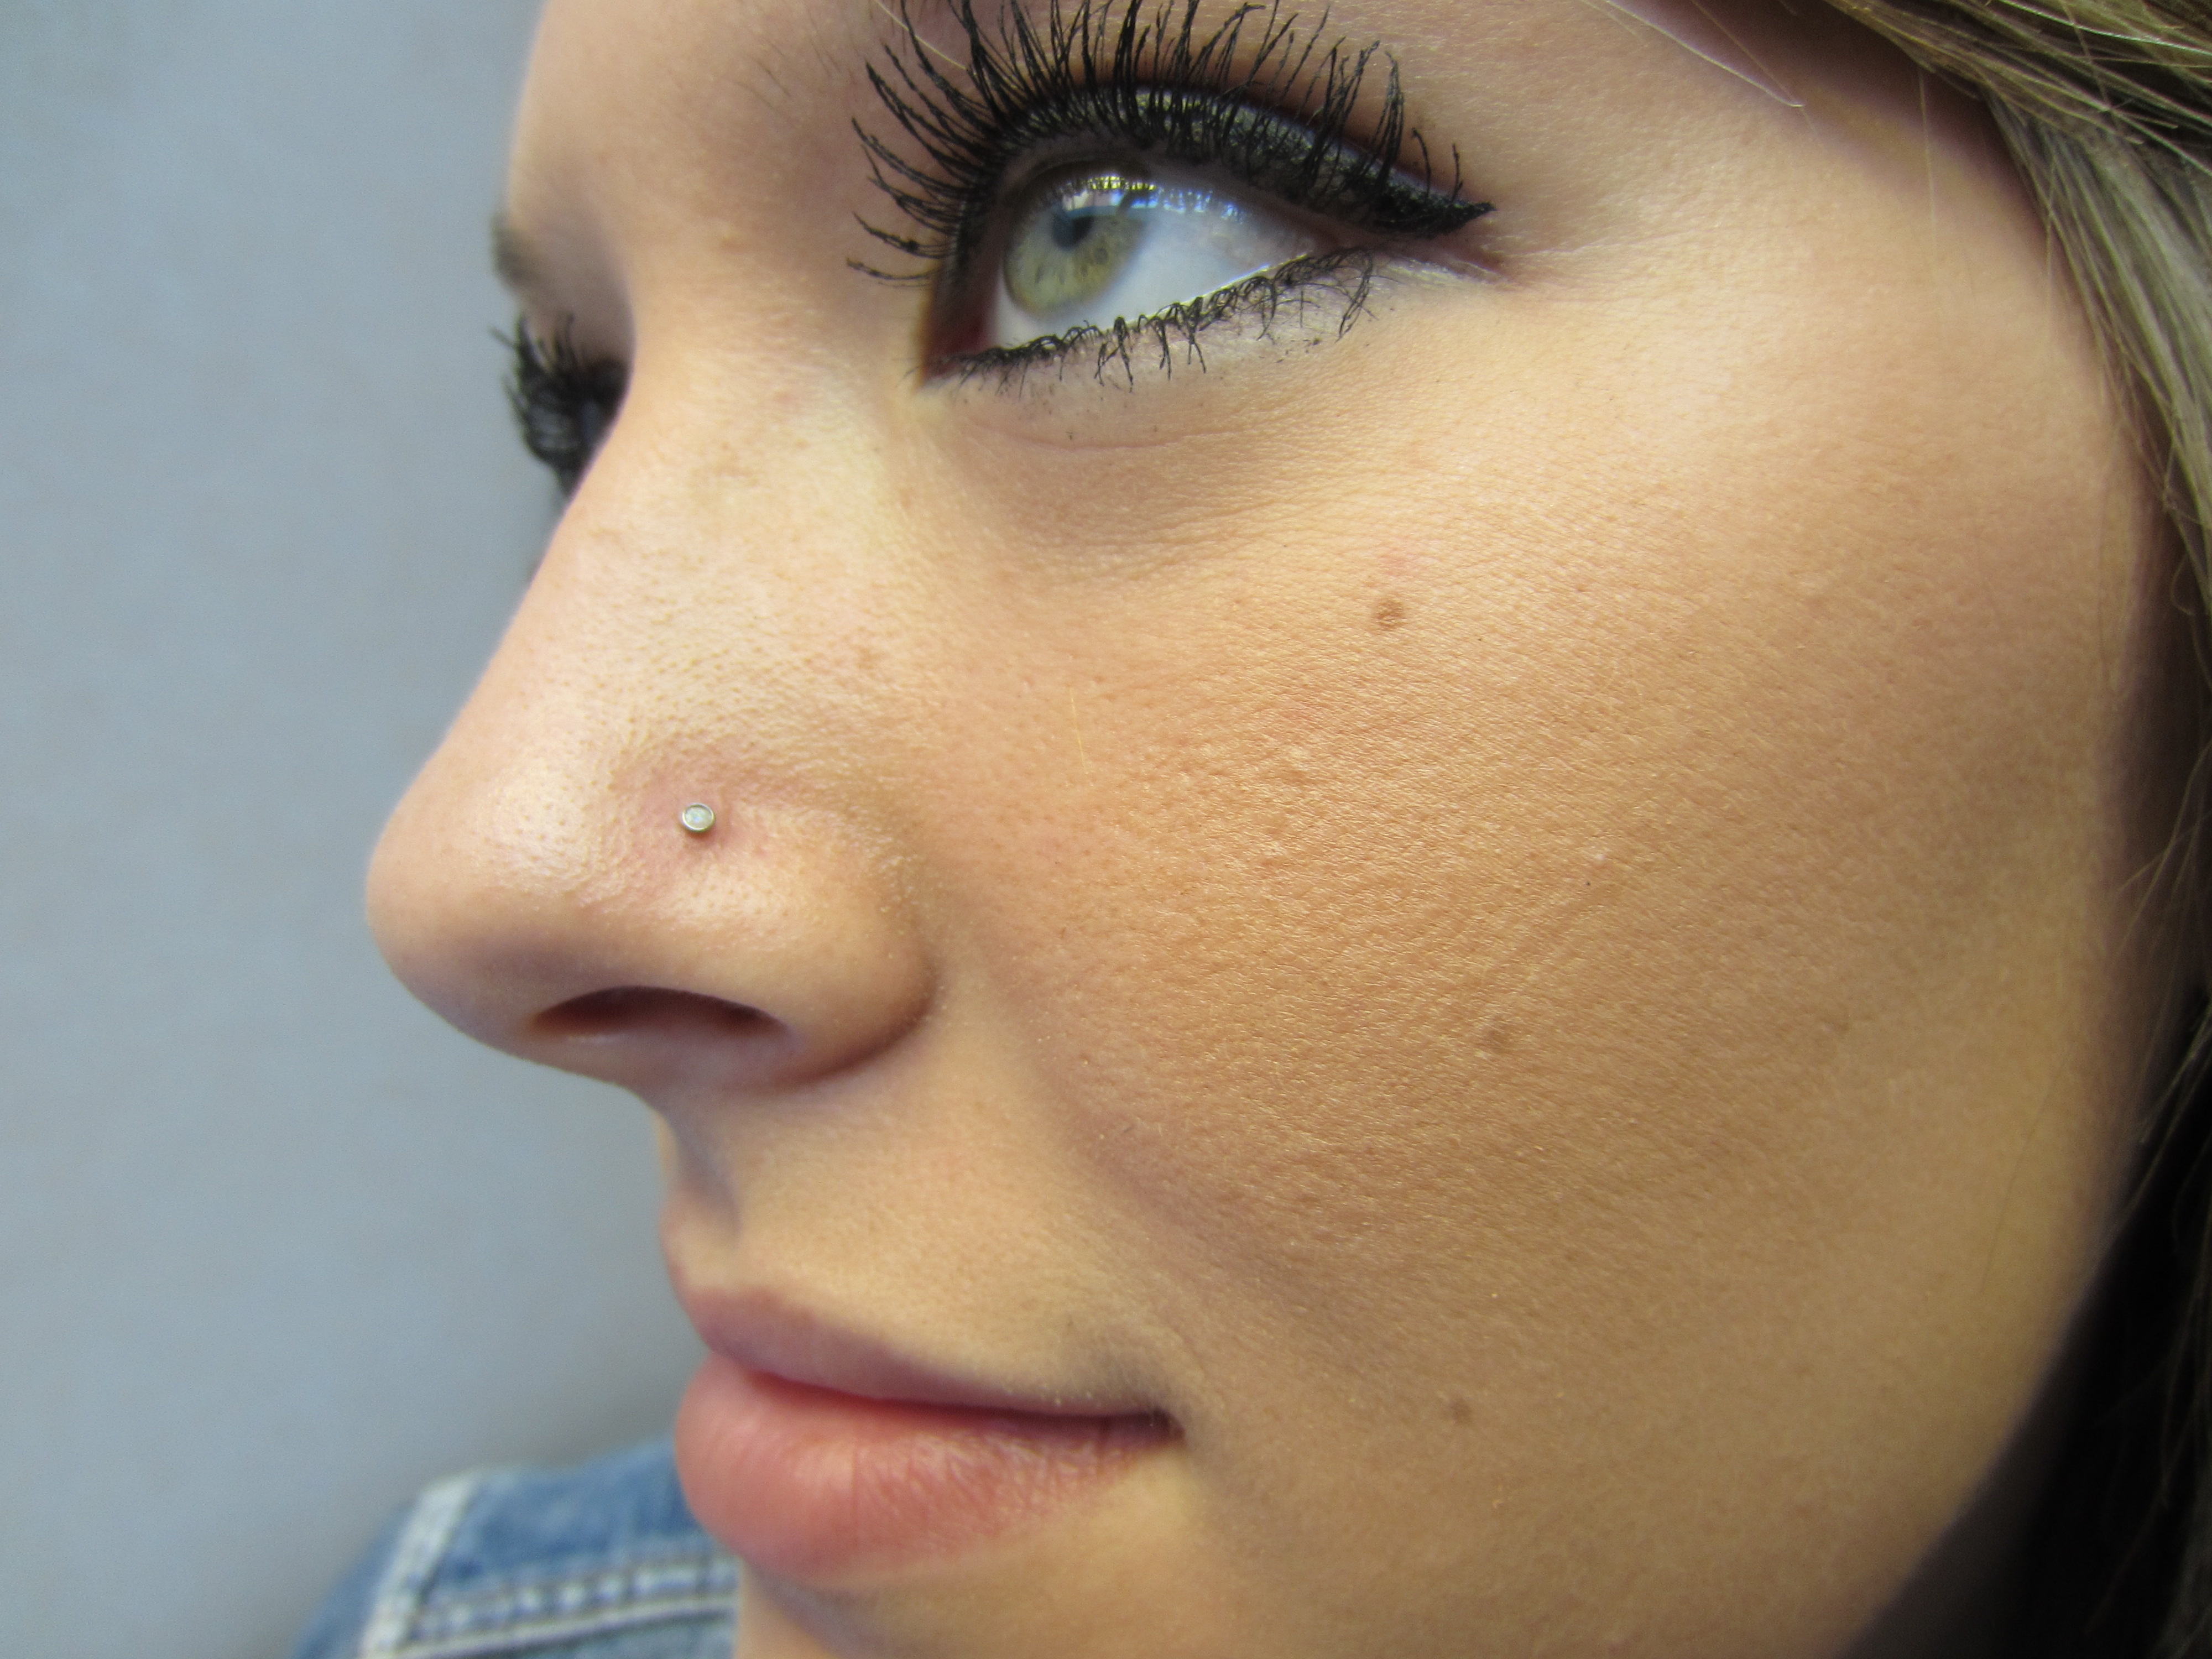 We Pierce The World Tigerlily Oxford Fashion Tattooing in where can i buy nose piercings for your Reference